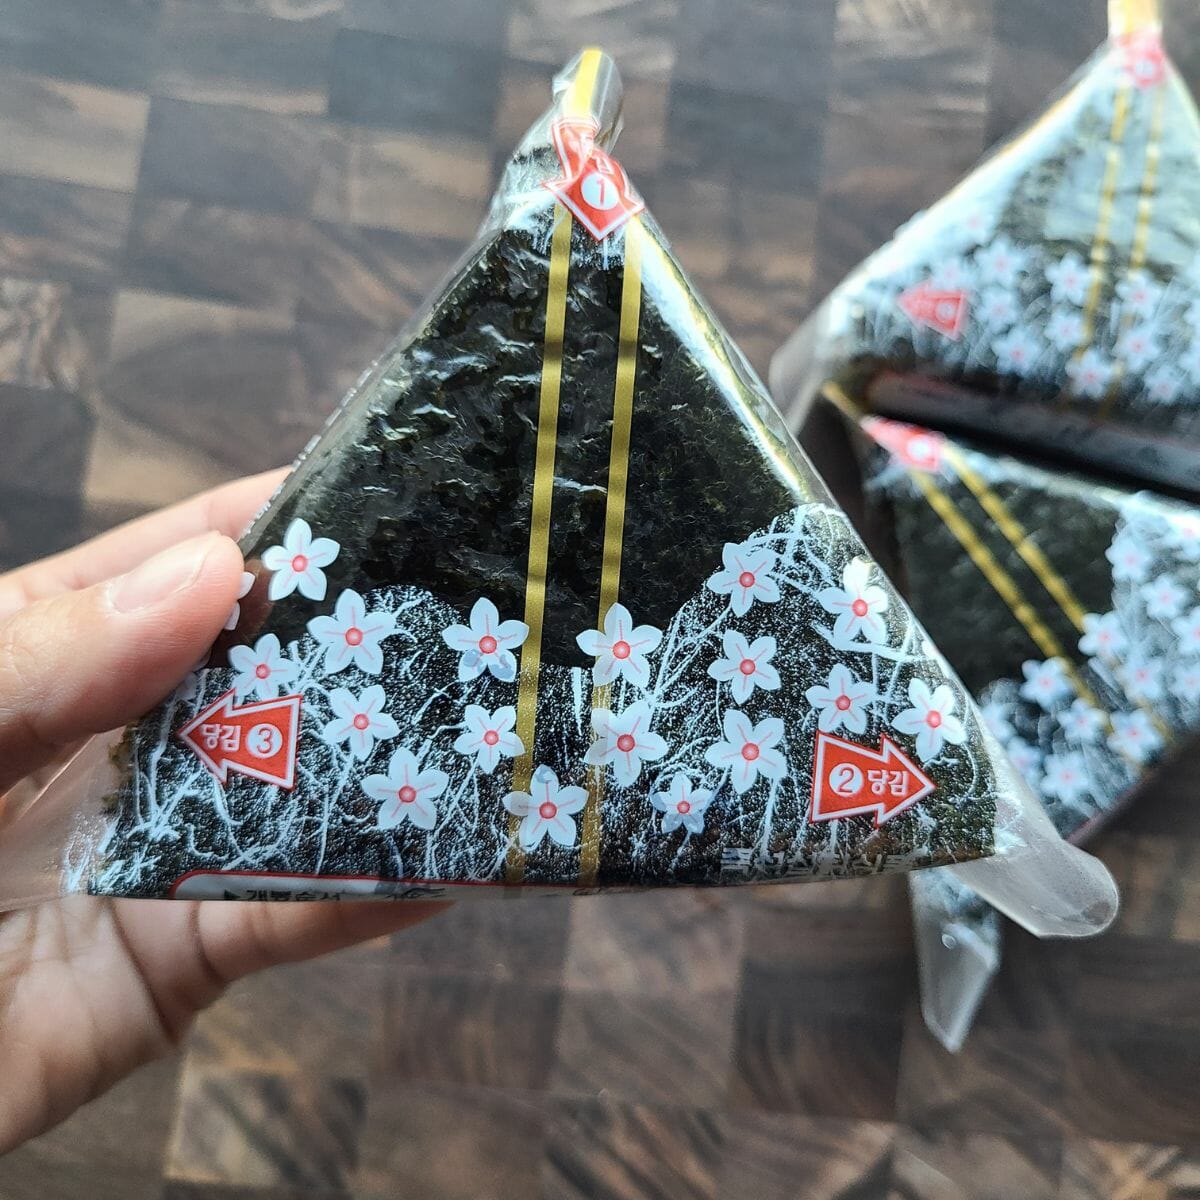 triangular shaped onigiri wrapped in individually wrapped plastic with flower decor